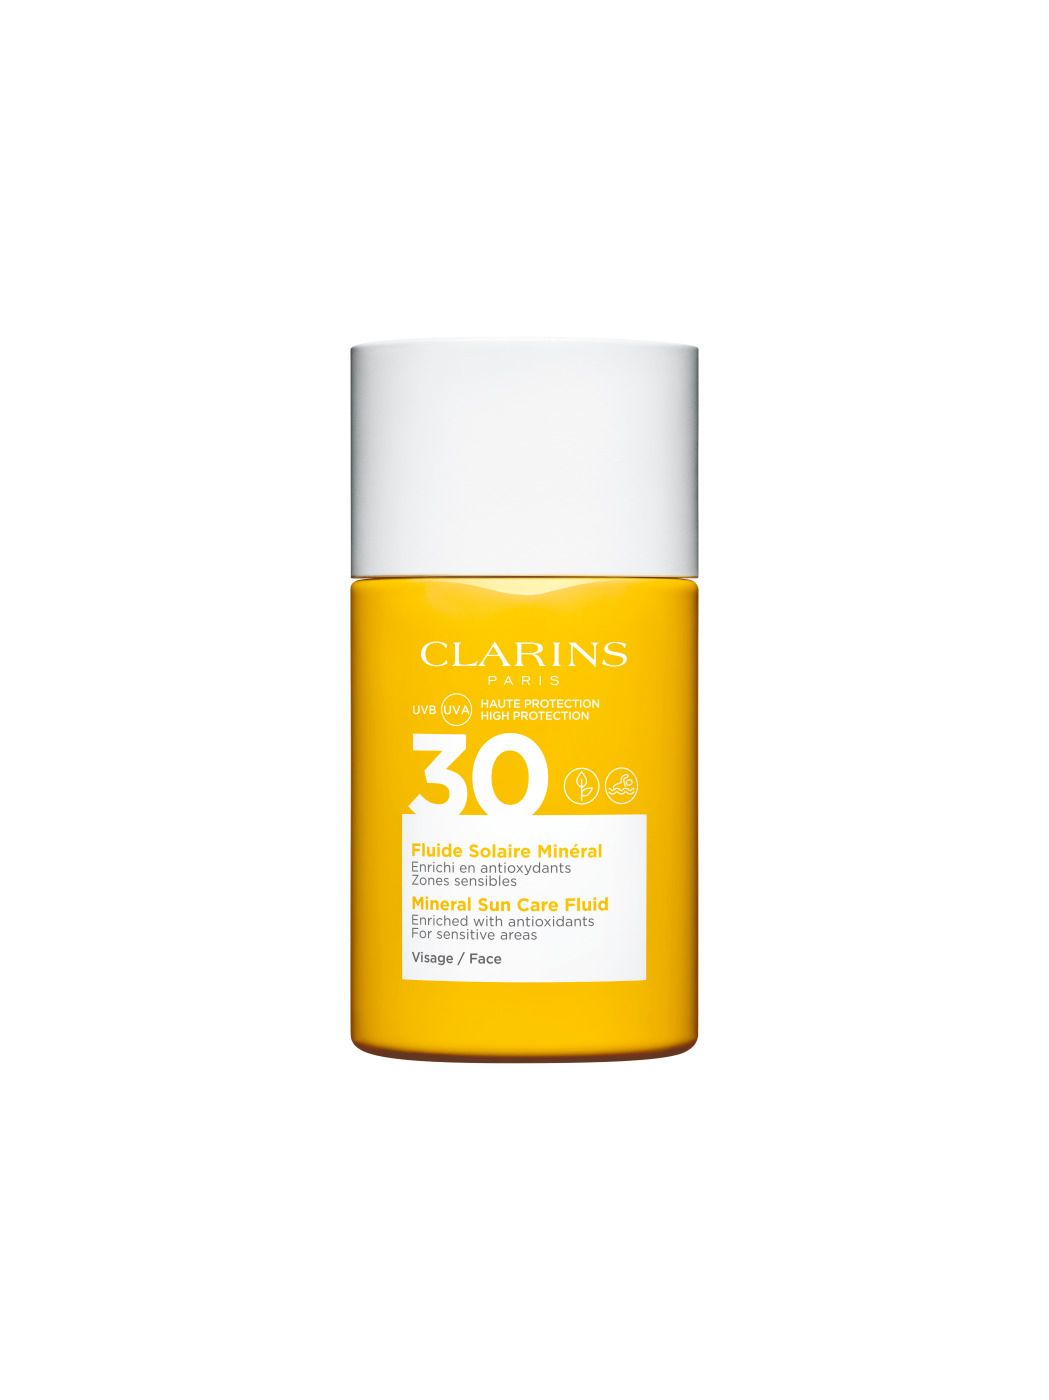 Clarins Mineral Sun Care Fluid for Face SPF30